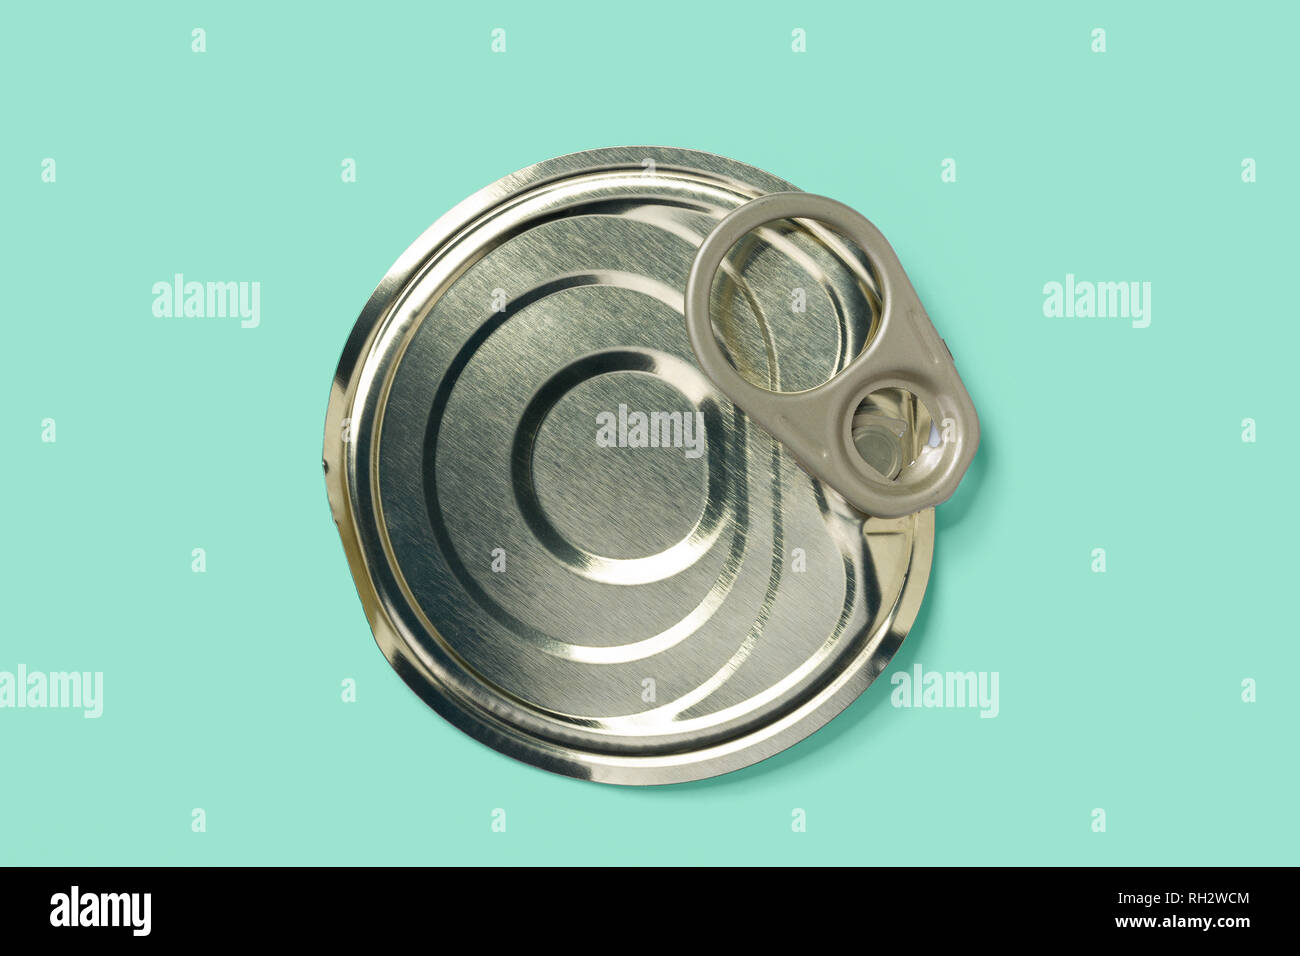 Removed lid of tin can with pull ring on green teal background, clipping path included Stock Photo